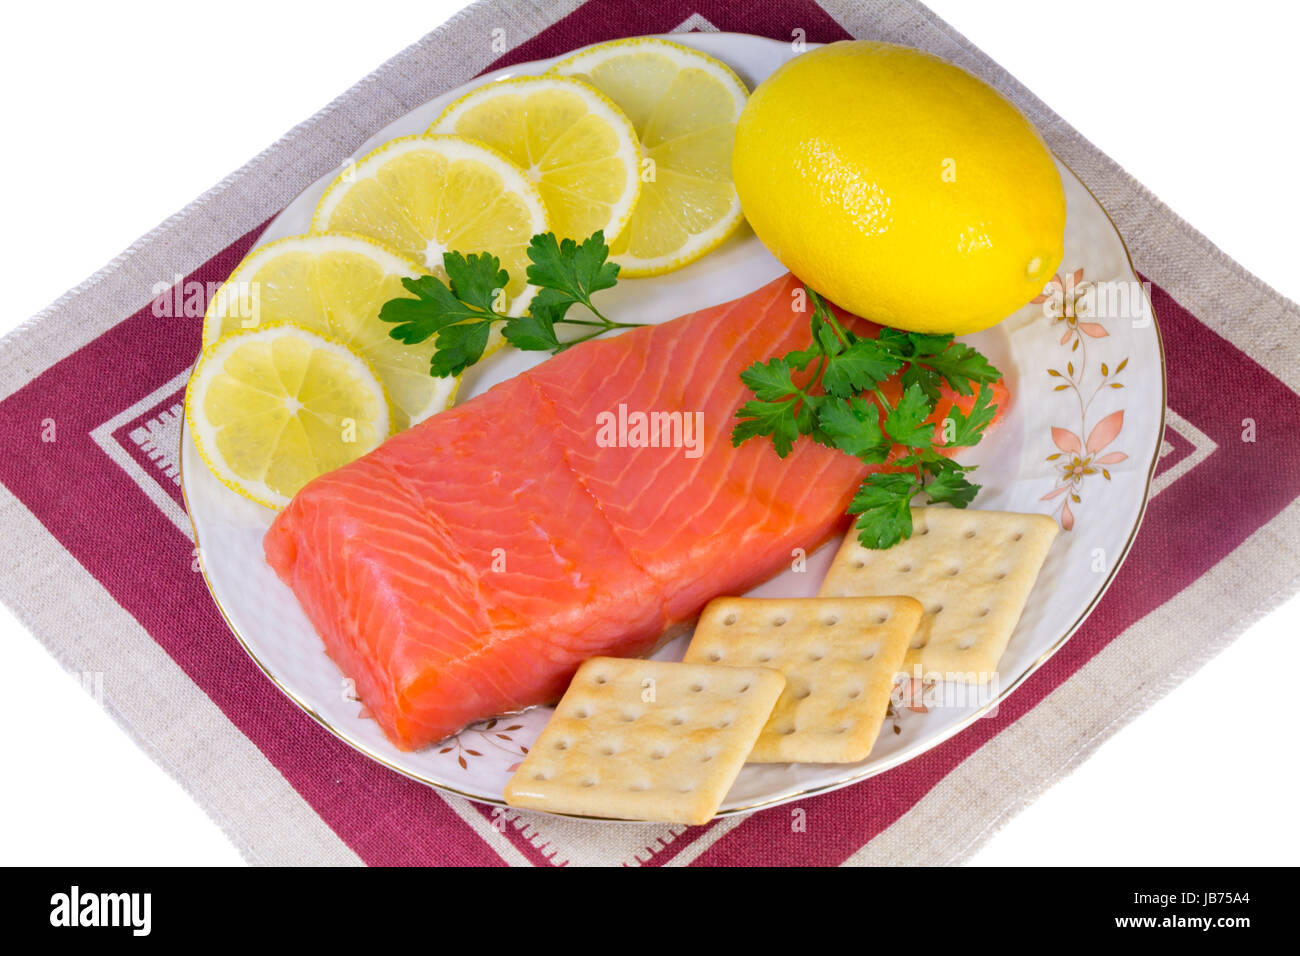 On a platter lie salmon fillet, lemons, sliced and whole, biscuits, fresh herbs parsley. Presented on a white background. Stock Photo